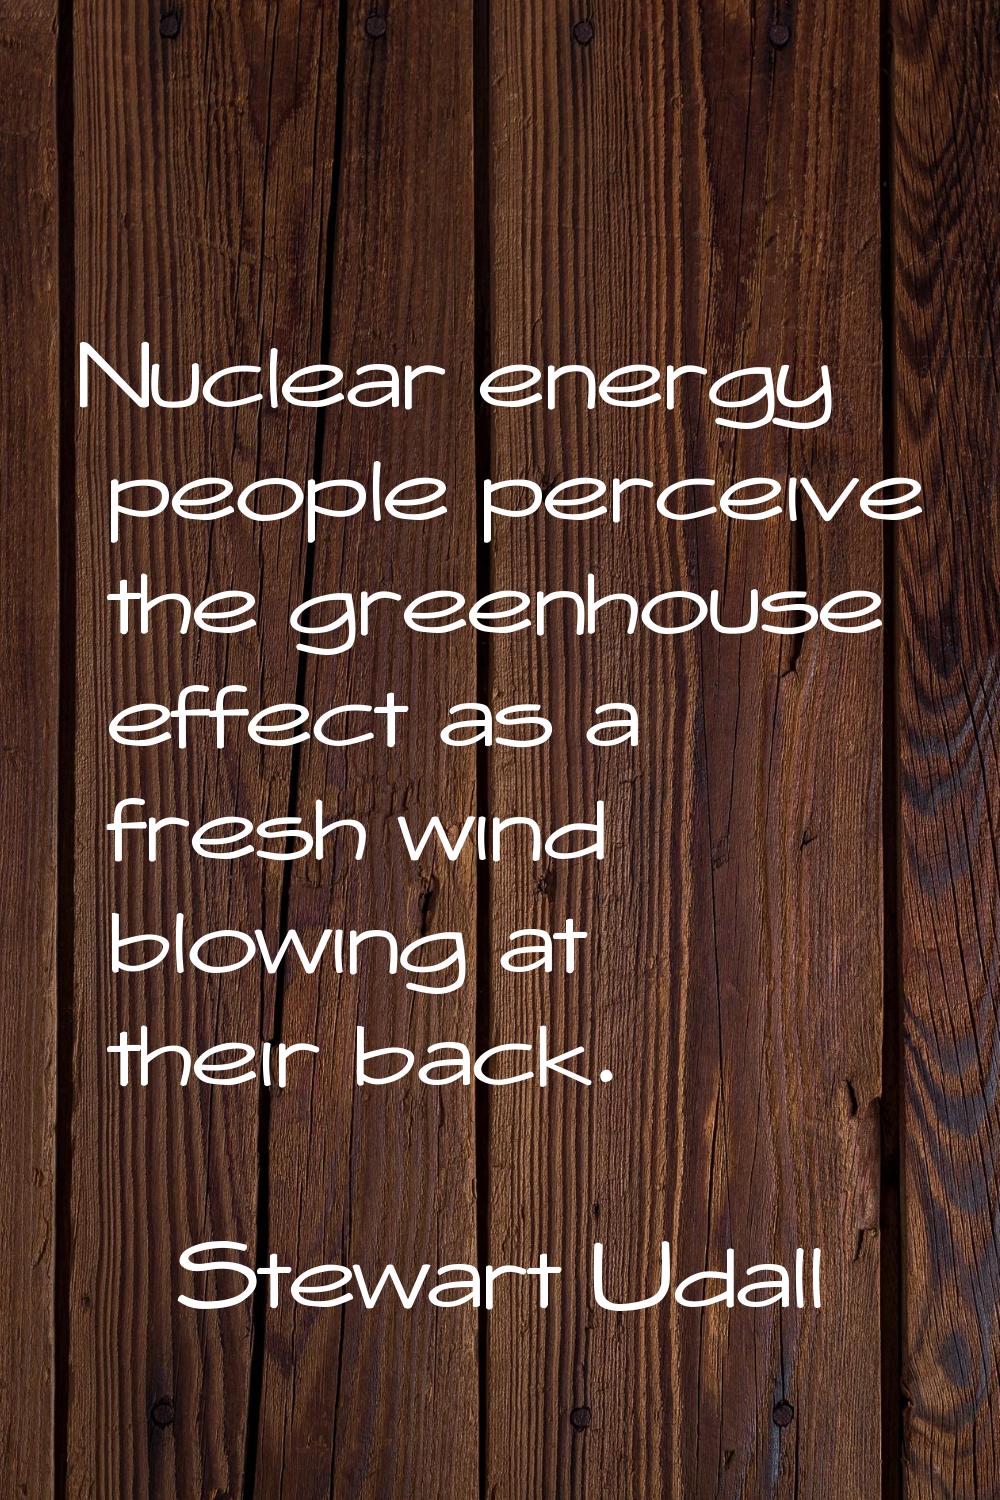 Nuclear energy people perceive the greenhouse effect as a fresh wind blowing at their back.